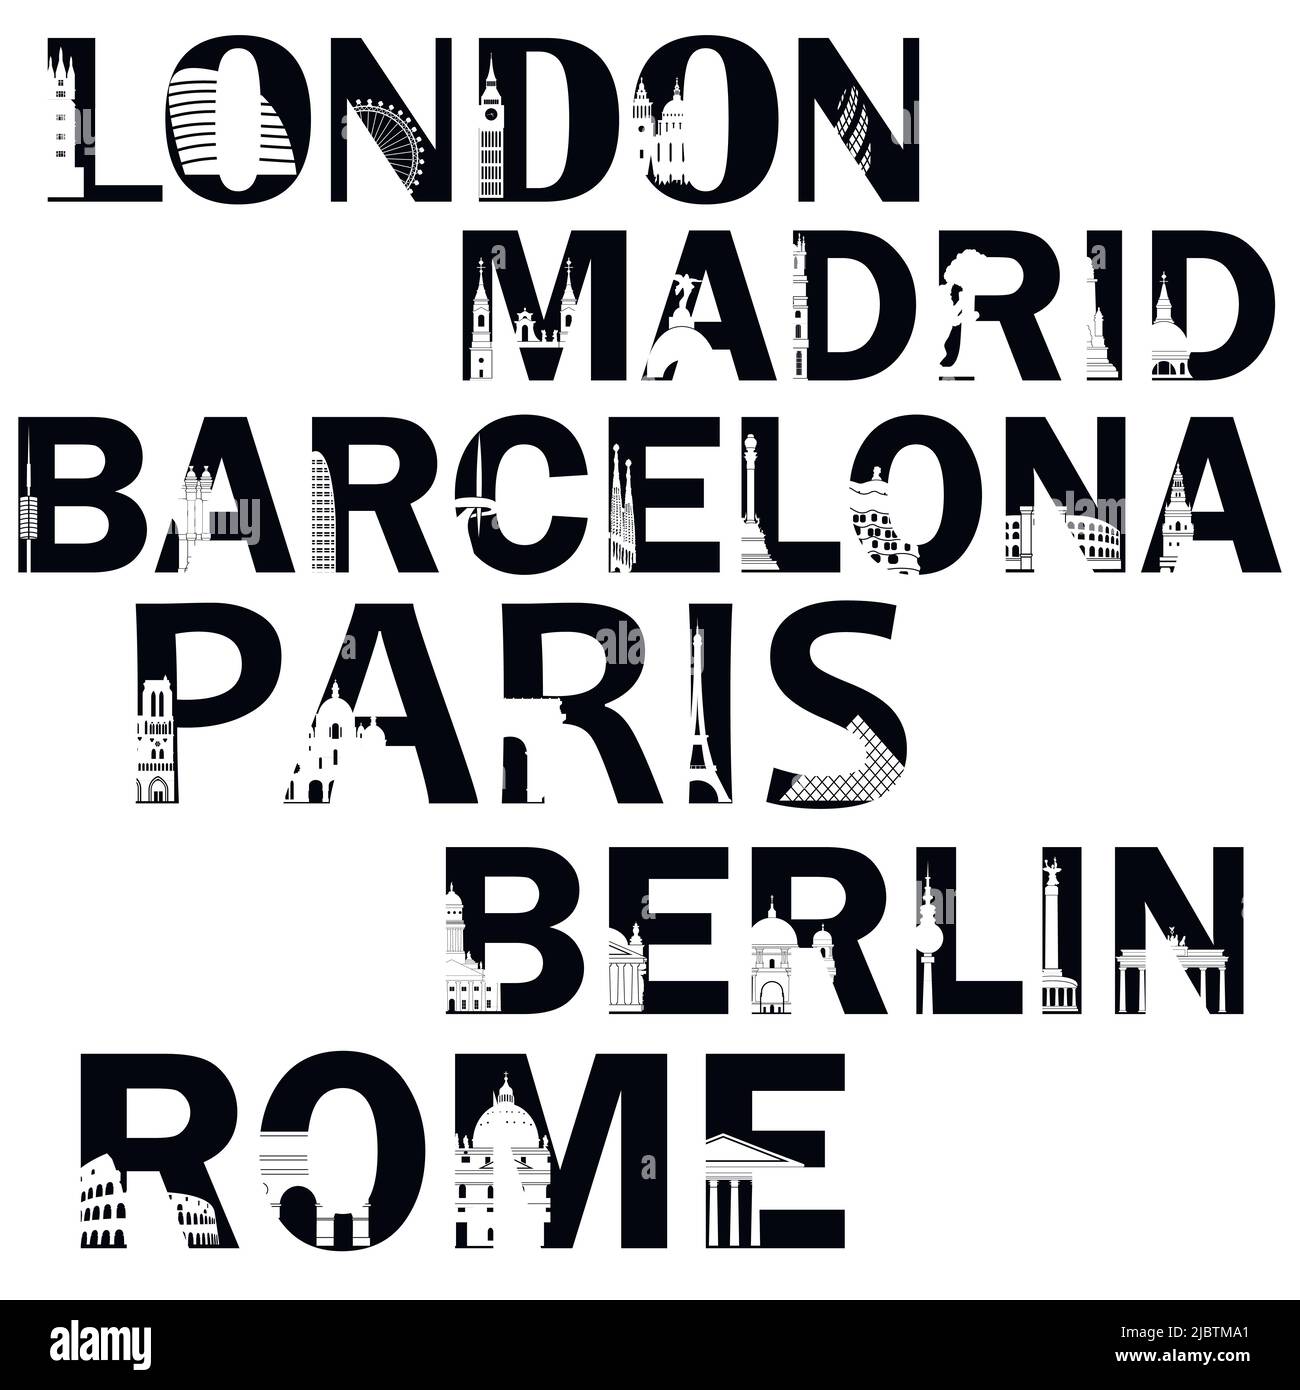 City names in words in black color with the  places of interest. London, Madrid, Barcelona, Paris, Berlin, Rome. Stock Vector